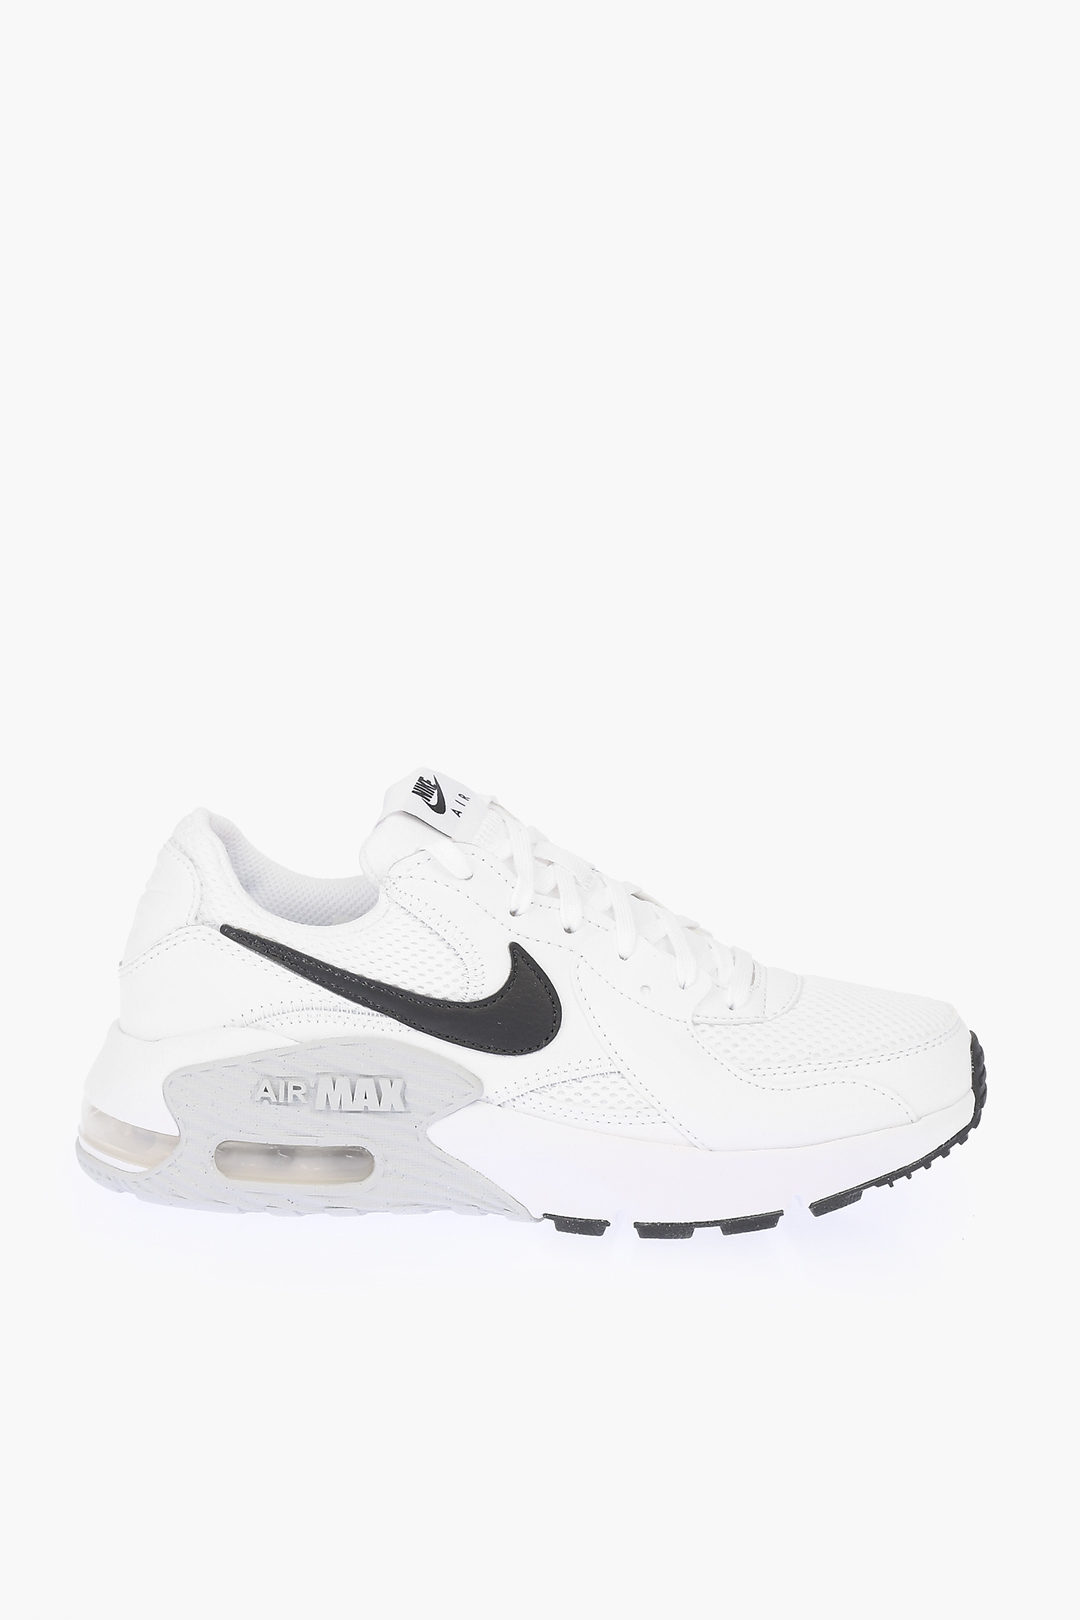 Coca Sentido táctil Revolucionario Nike Fabric and Leather AIR MAX EXCEE Sneakers women - Glamood Outlet